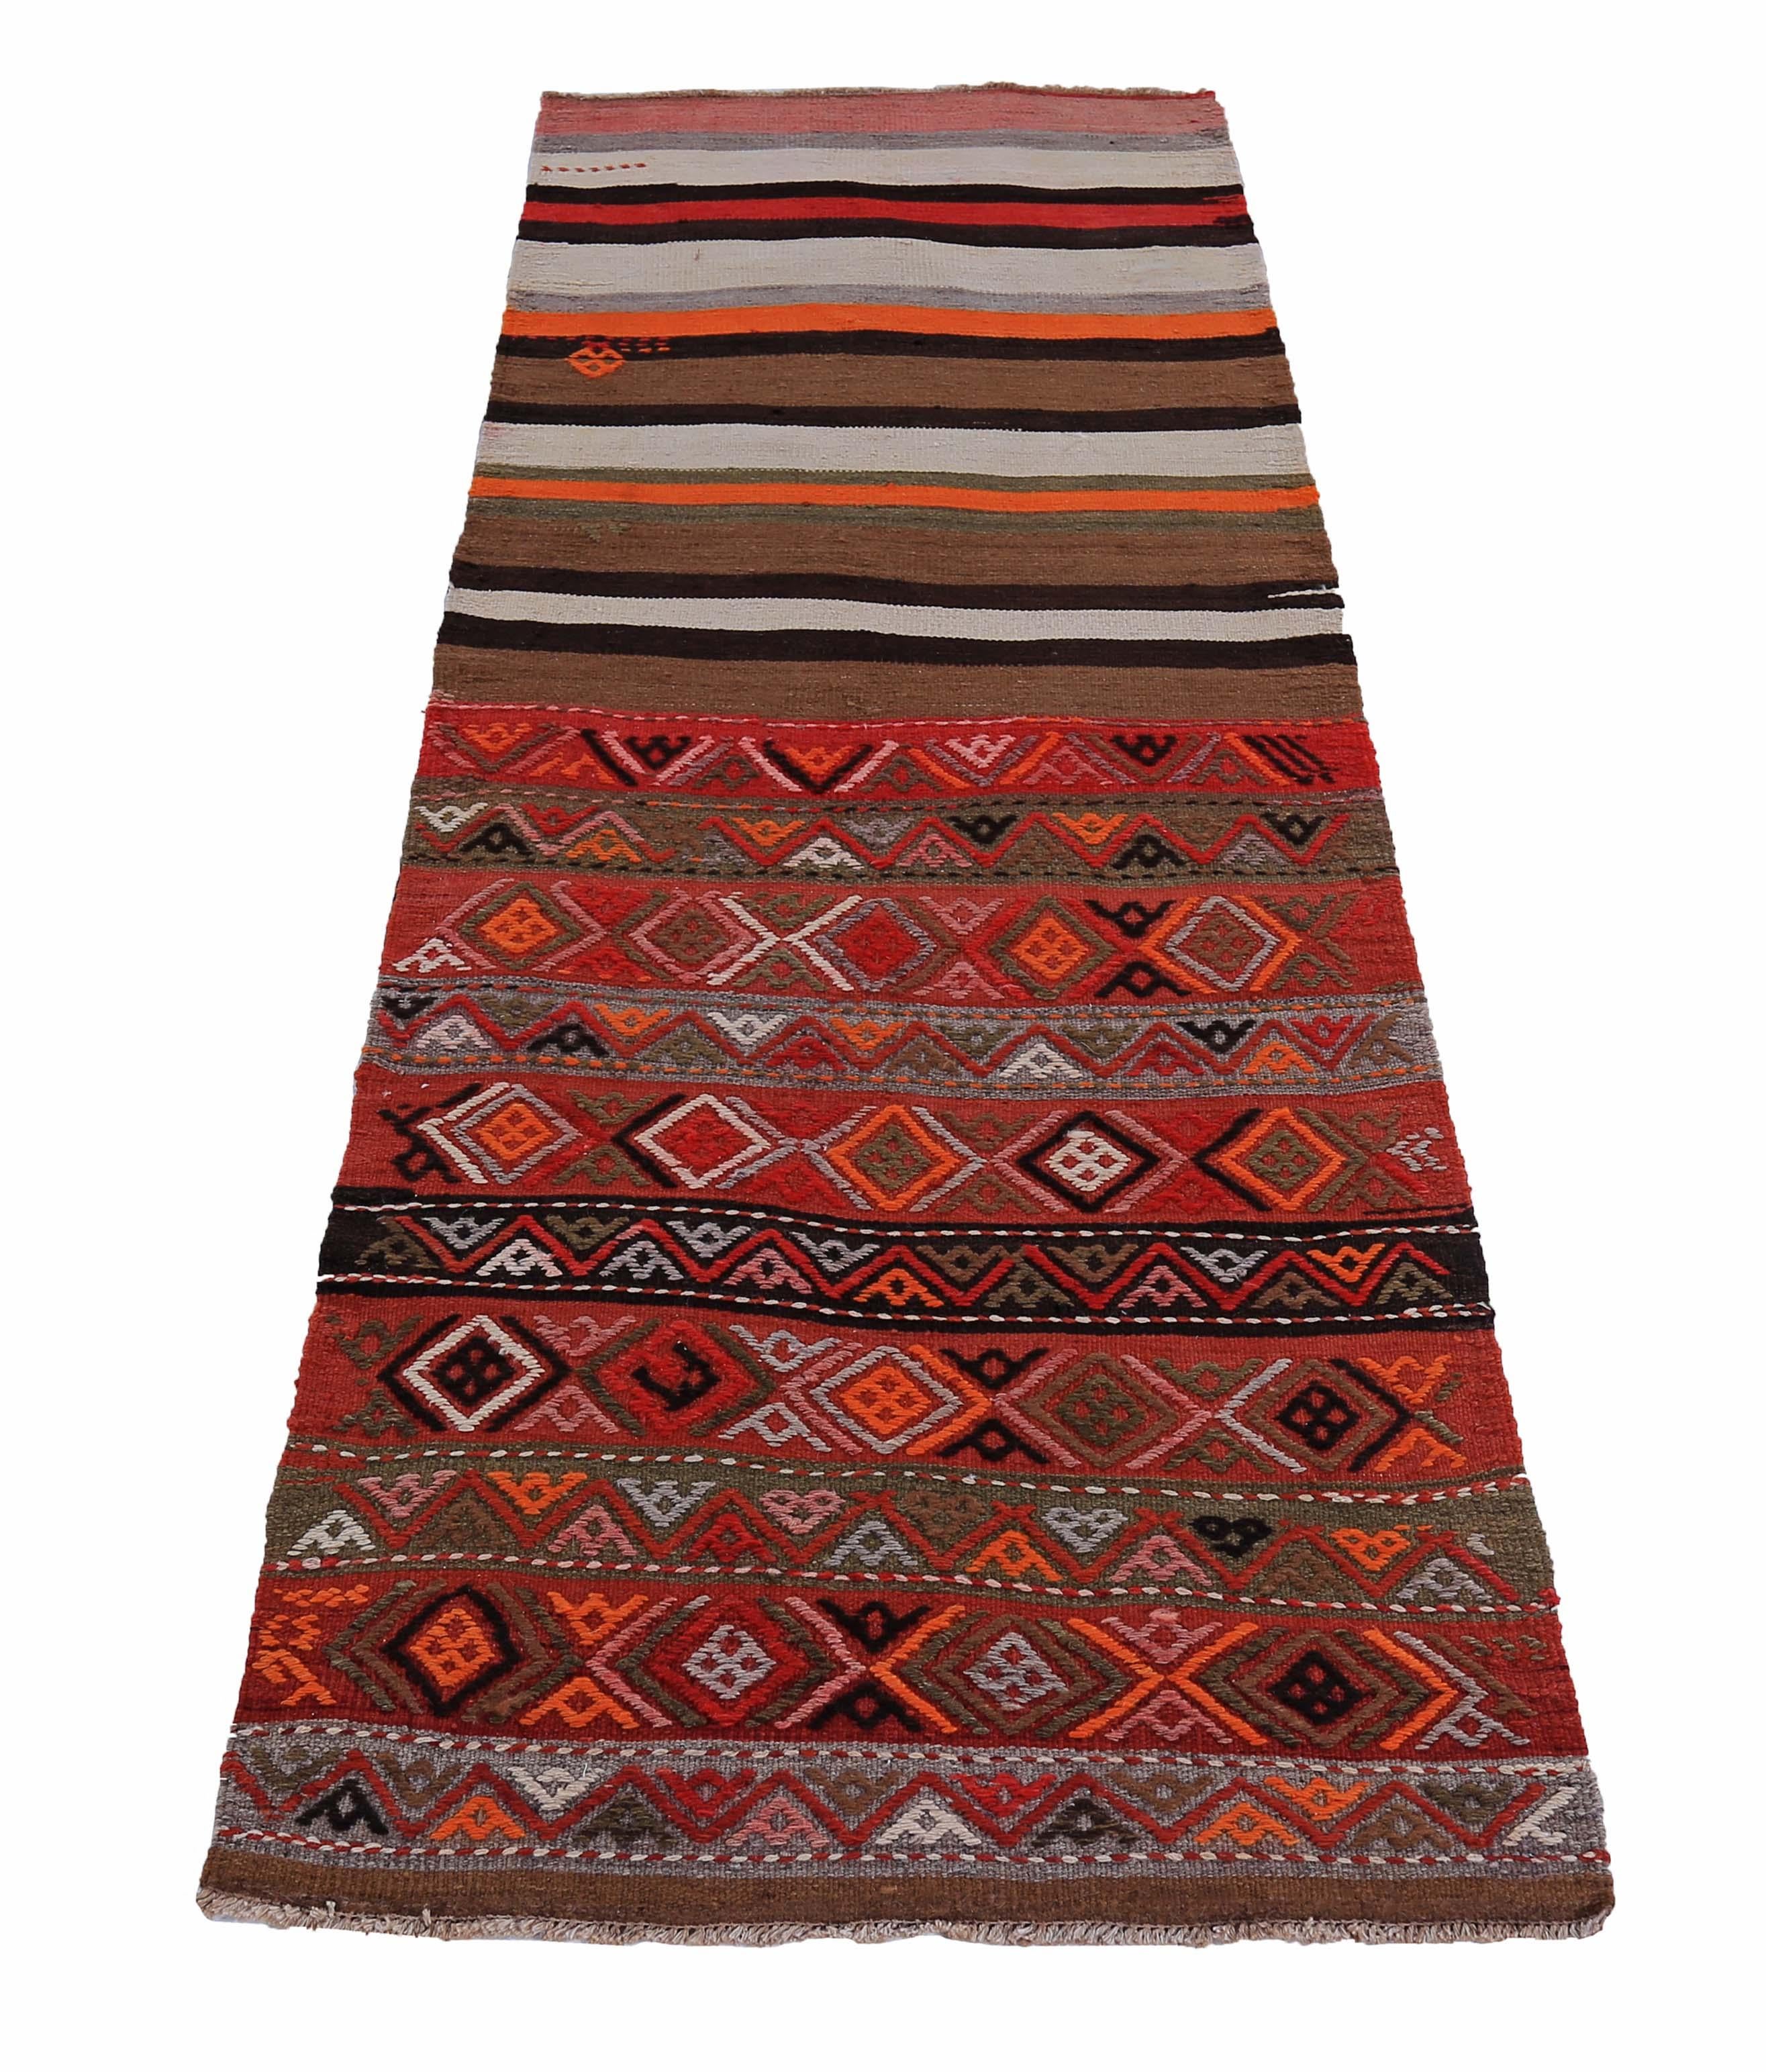 Turkish rug handwoven from the finest sheep’s wool and colored with all-natural vegetable dyes that are safe for humans and pets. It’s a traditional Kilim flat-weave design featuring orange, blue, red and black diamond patterns. It’s a stunning